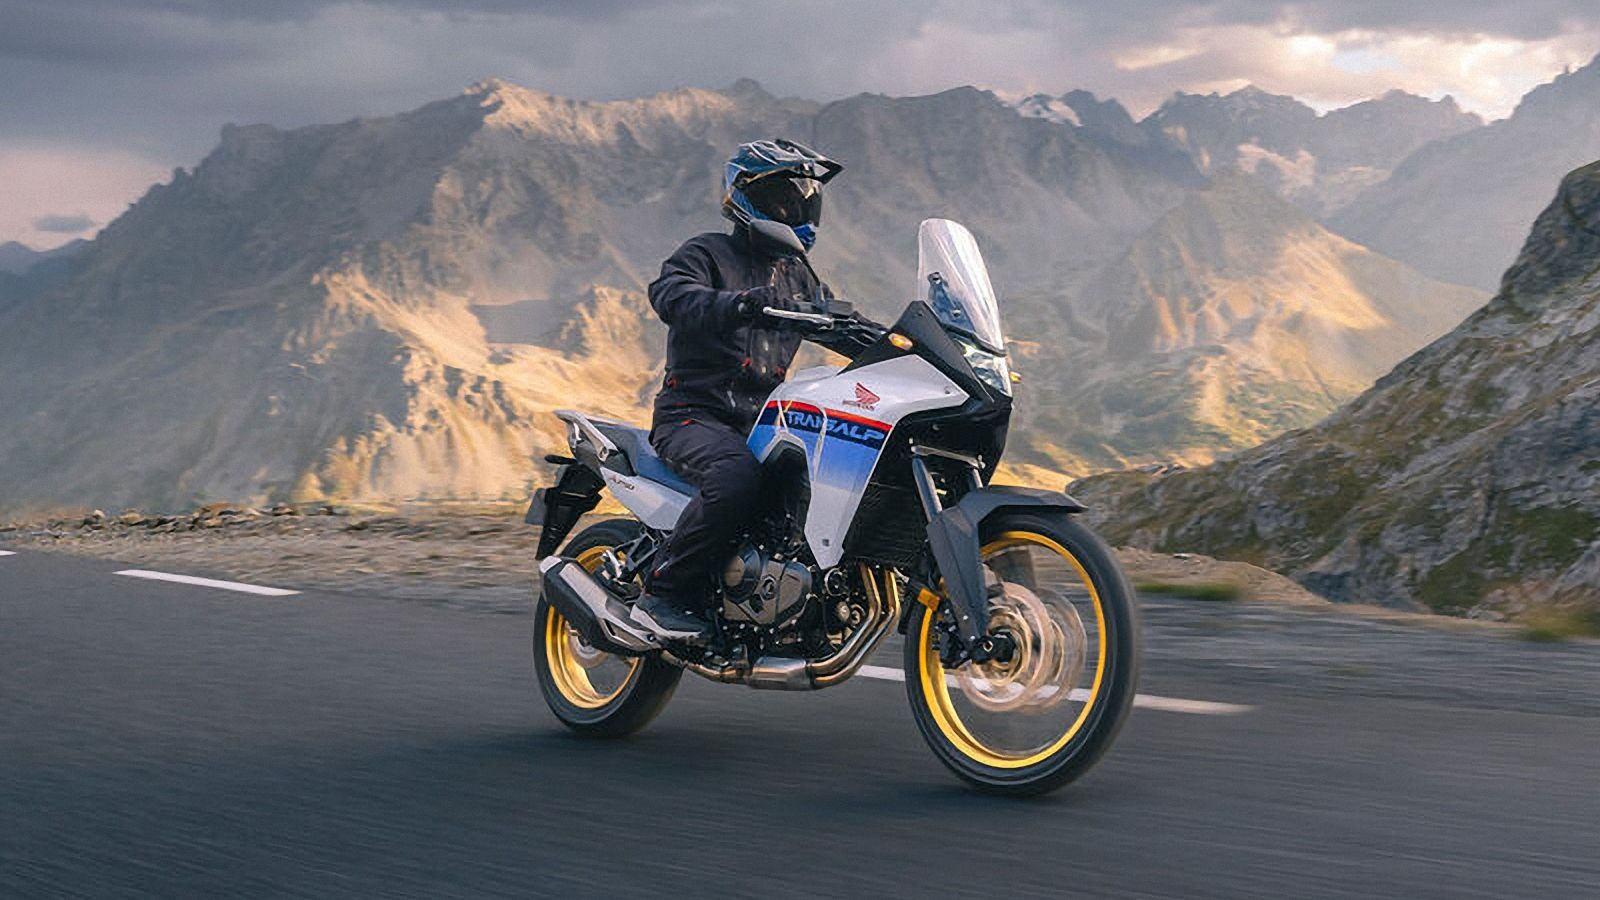 Here’s Why The 2023 Honda Transalp XL750 Will Be Epic Value For The Money